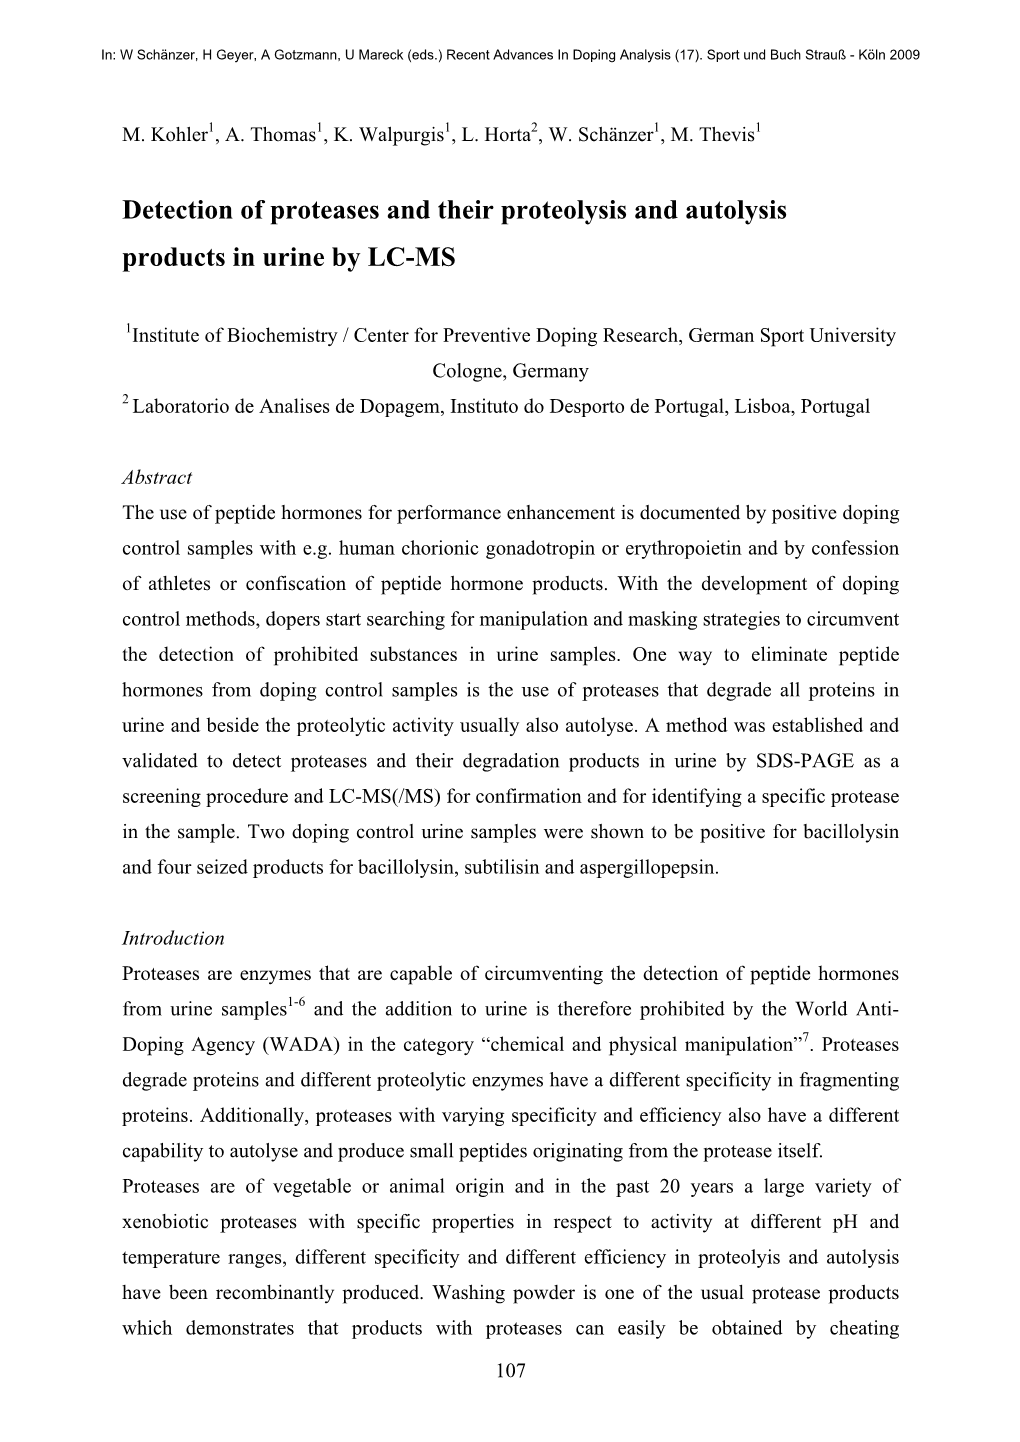 Detection of Proteases and Their Proteolysis and Autolysis Products in Urine by LC-MS